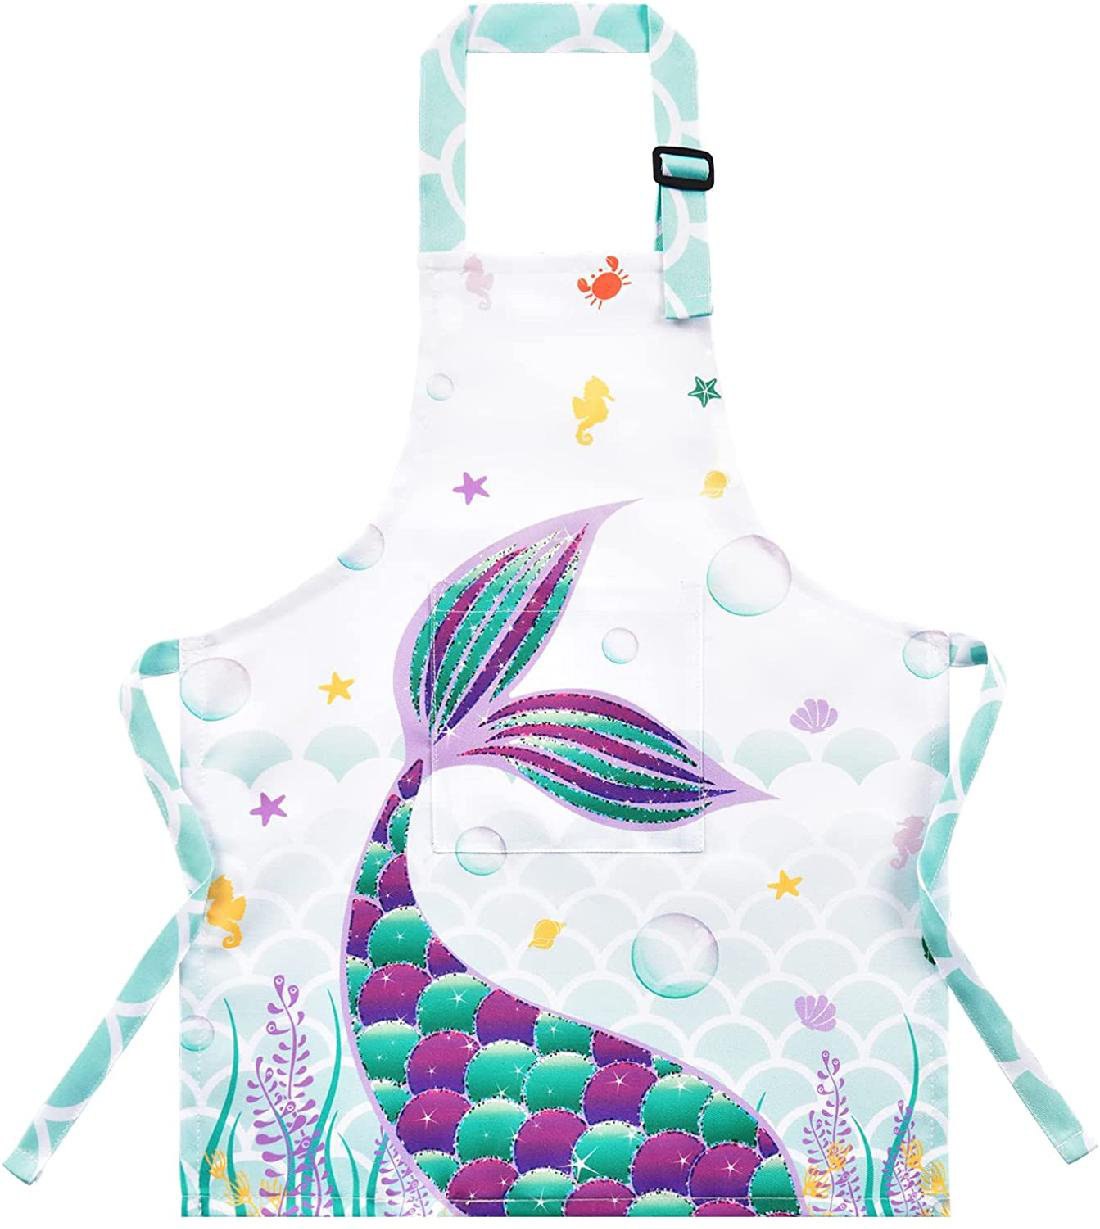 fun whimsical fabric with cute comical foods and utensils apron for a young girl